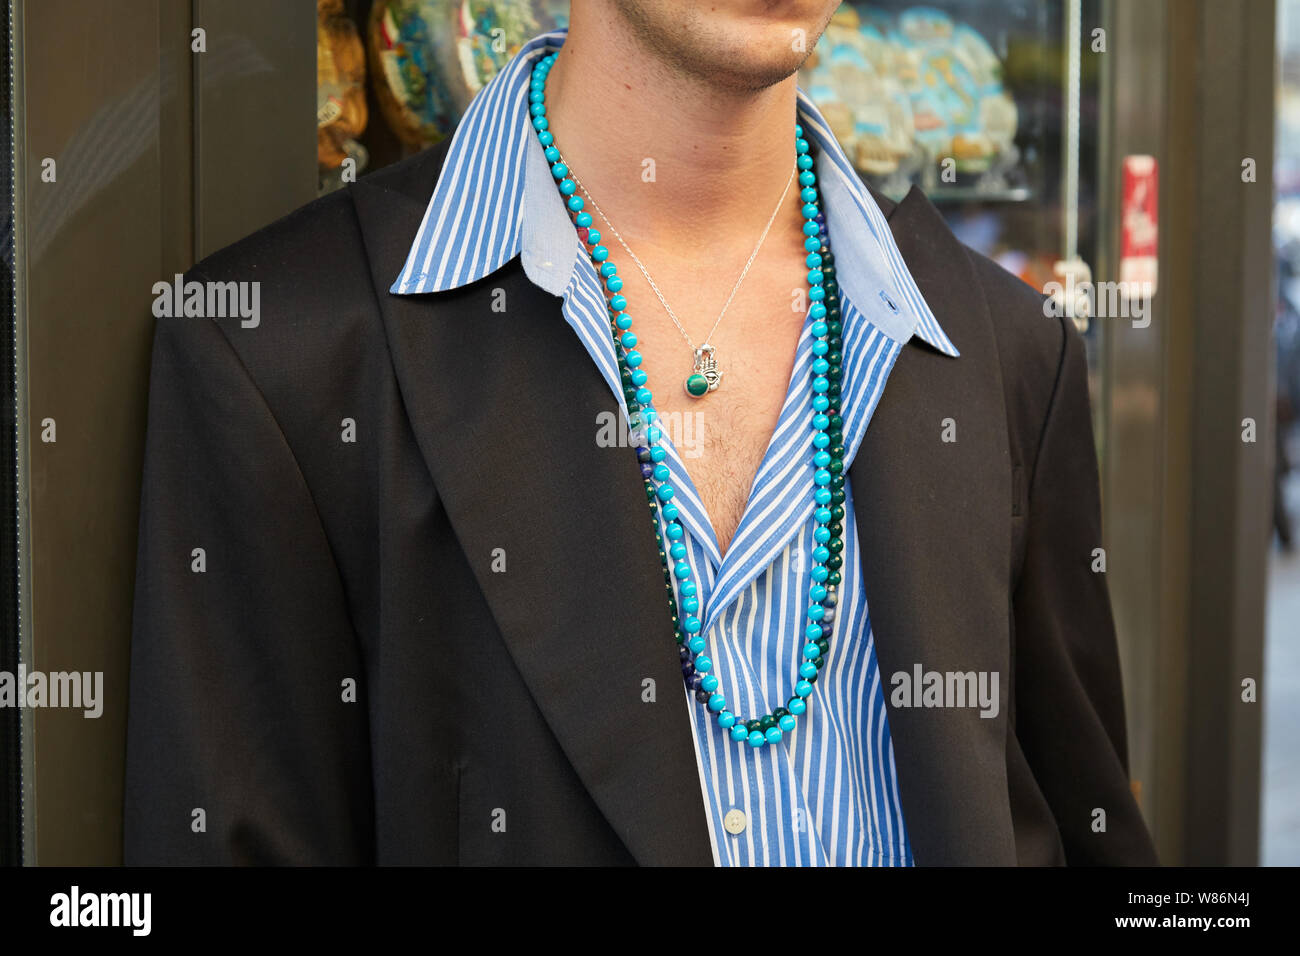 MILAN, ITALY - JUNE 16, 2019: Man with blue and white striped shirt and turquoise necklace before Palm Angels fashion show, Milan Fashion Week street Stock Photo